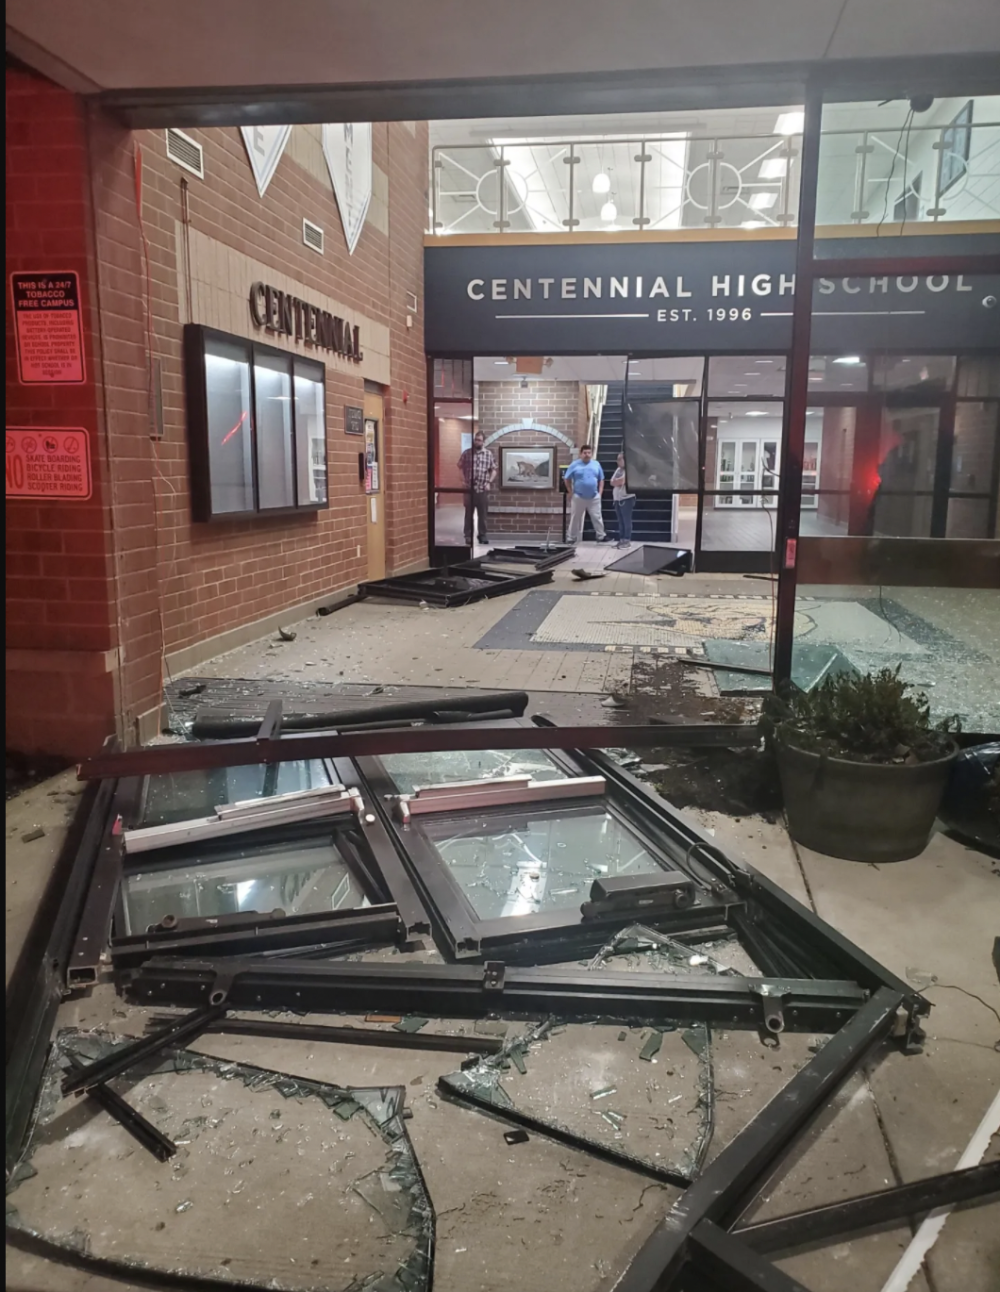 The entryway of Centennial High School in Franklin was damaged after a 17-year-old Williamson County School District student allegedly drove his vehicle into the school. The school will be open for classes Jan. 18, according to the district. (Courtesy Franklin Police Department)